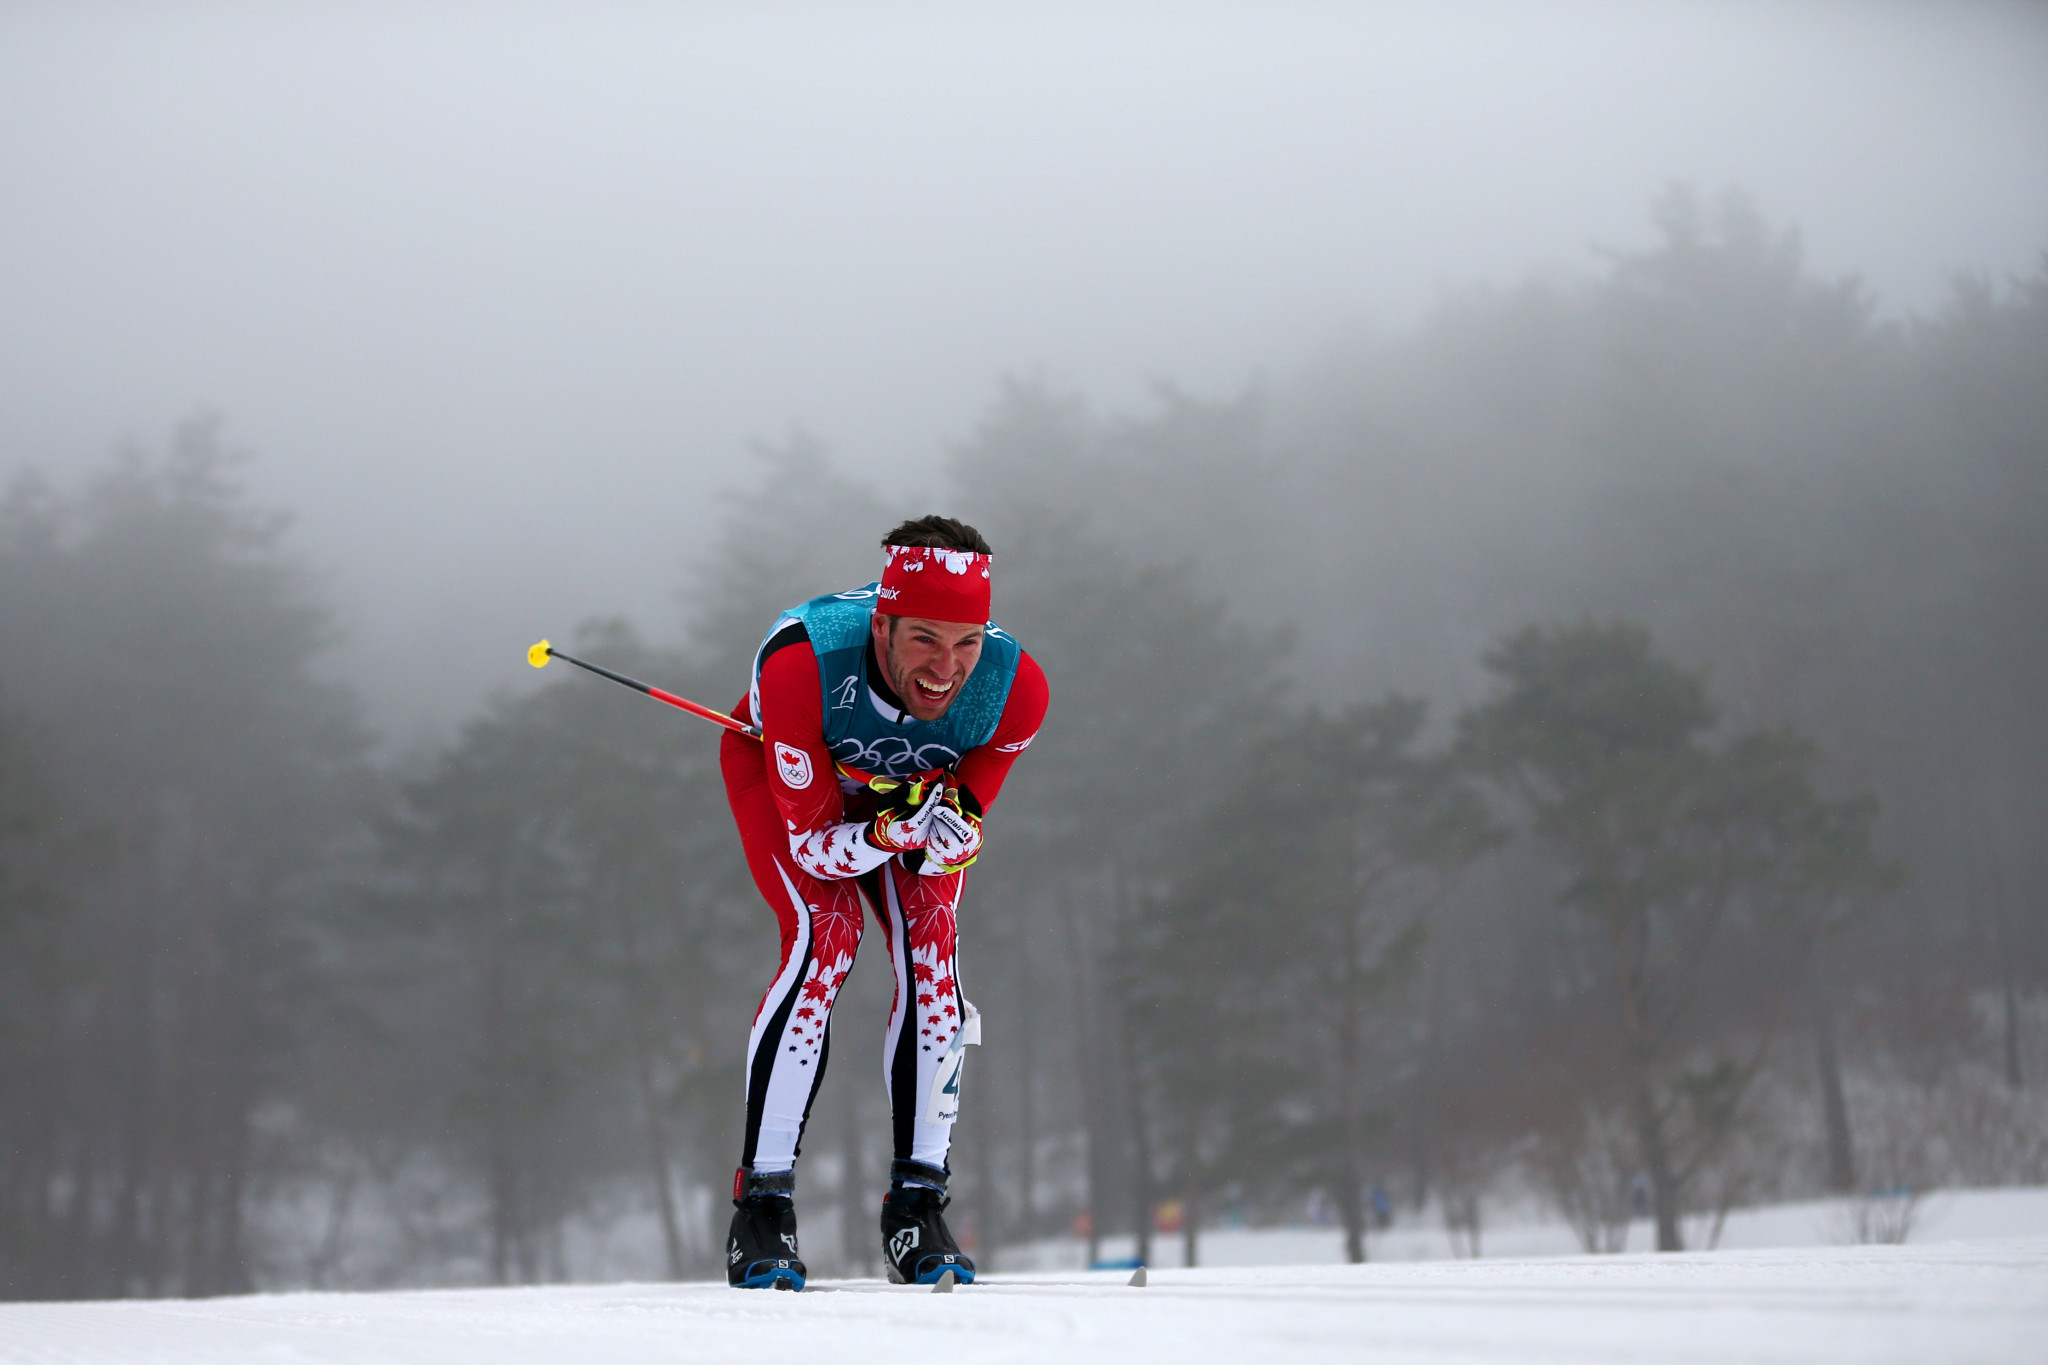 Canada's next generation of cross-country skiers will be under the guidance of Eric de Nys ©Getty Images